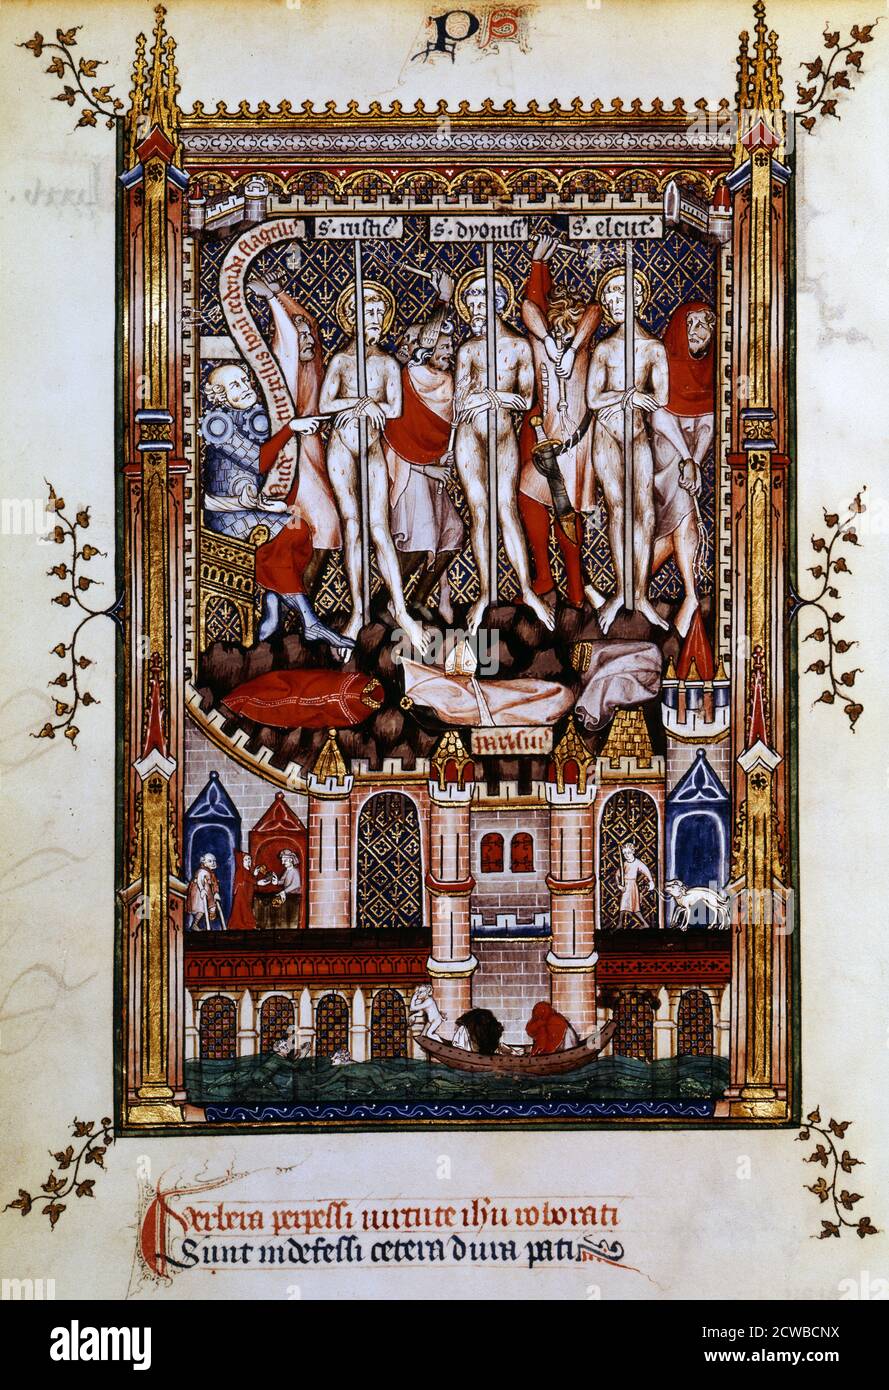 Flagellation of St Denis, St Rustic and St Eleutherius, on the orders of Sisinnius, 1317. Manuscript illustration from a work on the life of St Denis (died c258 AD), written by Yves, a monk at the Abbey of St Denis. The book depicts the torture and martyrdom of the saint by the Roman governor Fescenninus Sisinnius. From the collection of the Bibliotheque Nationale, Paris. The artist is unknown. Stock Photo